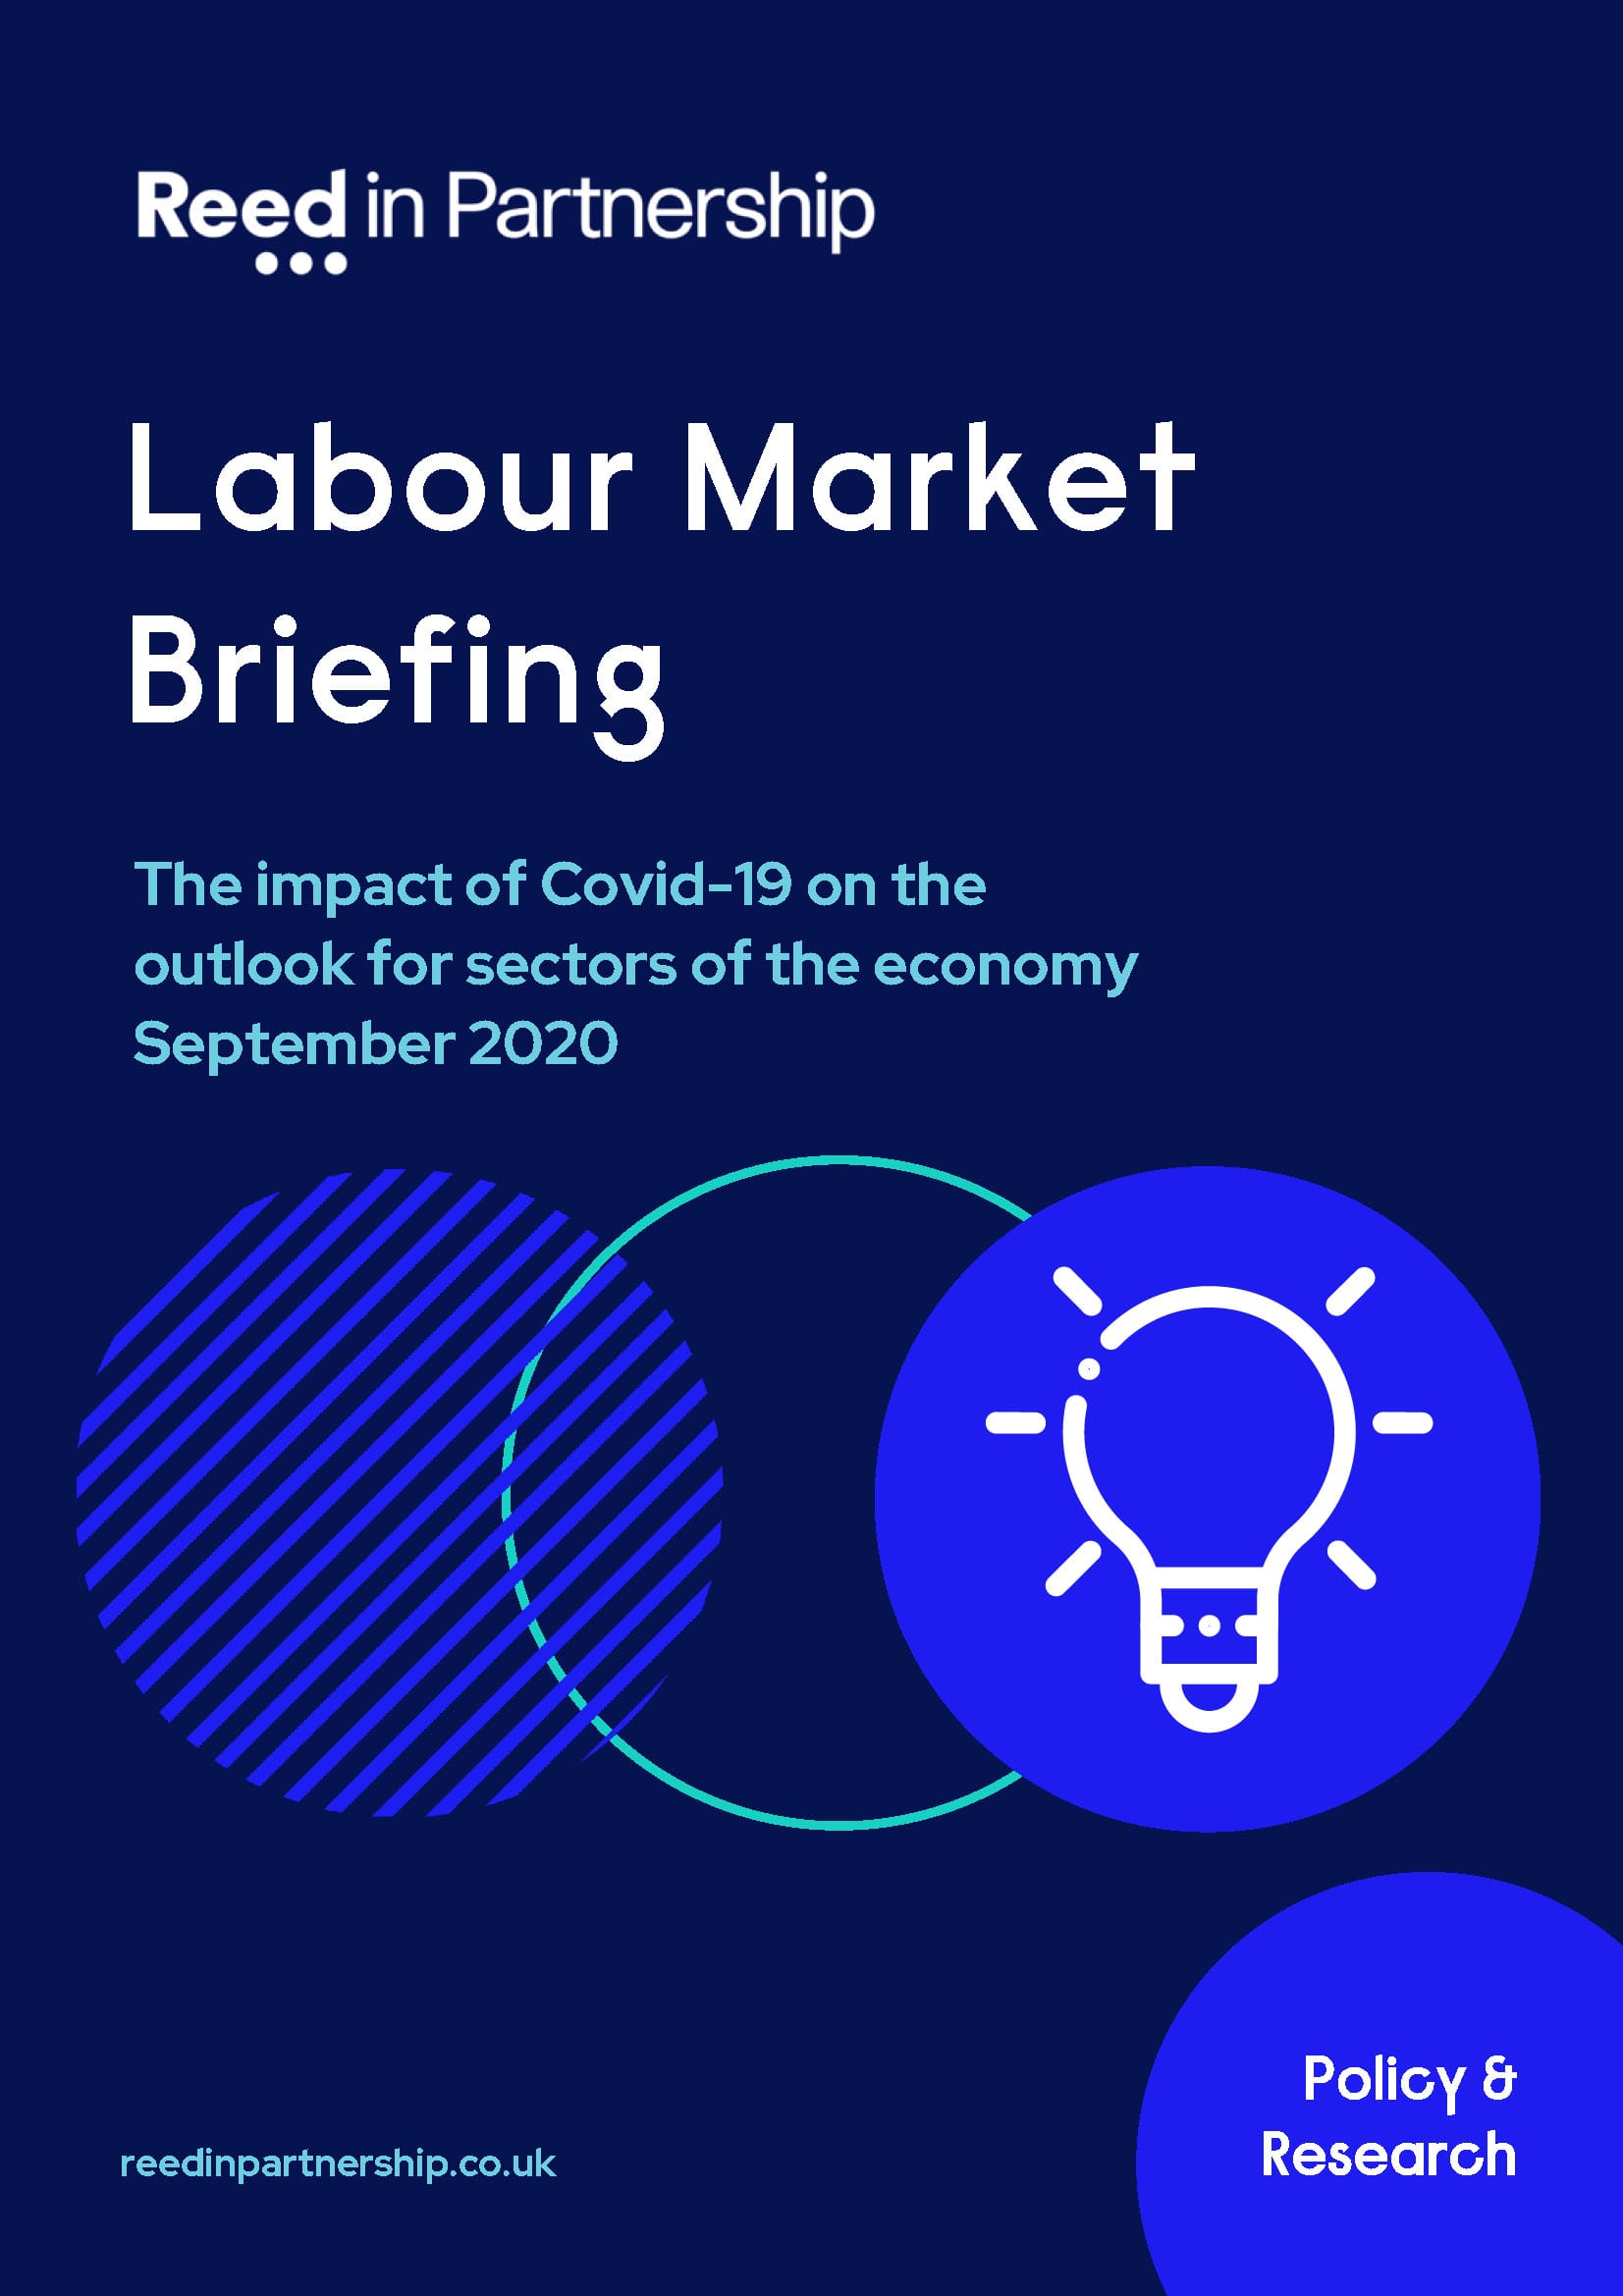 Labour Market Briefing - The impact of Covid-19 on the outlook for sectors of the economy